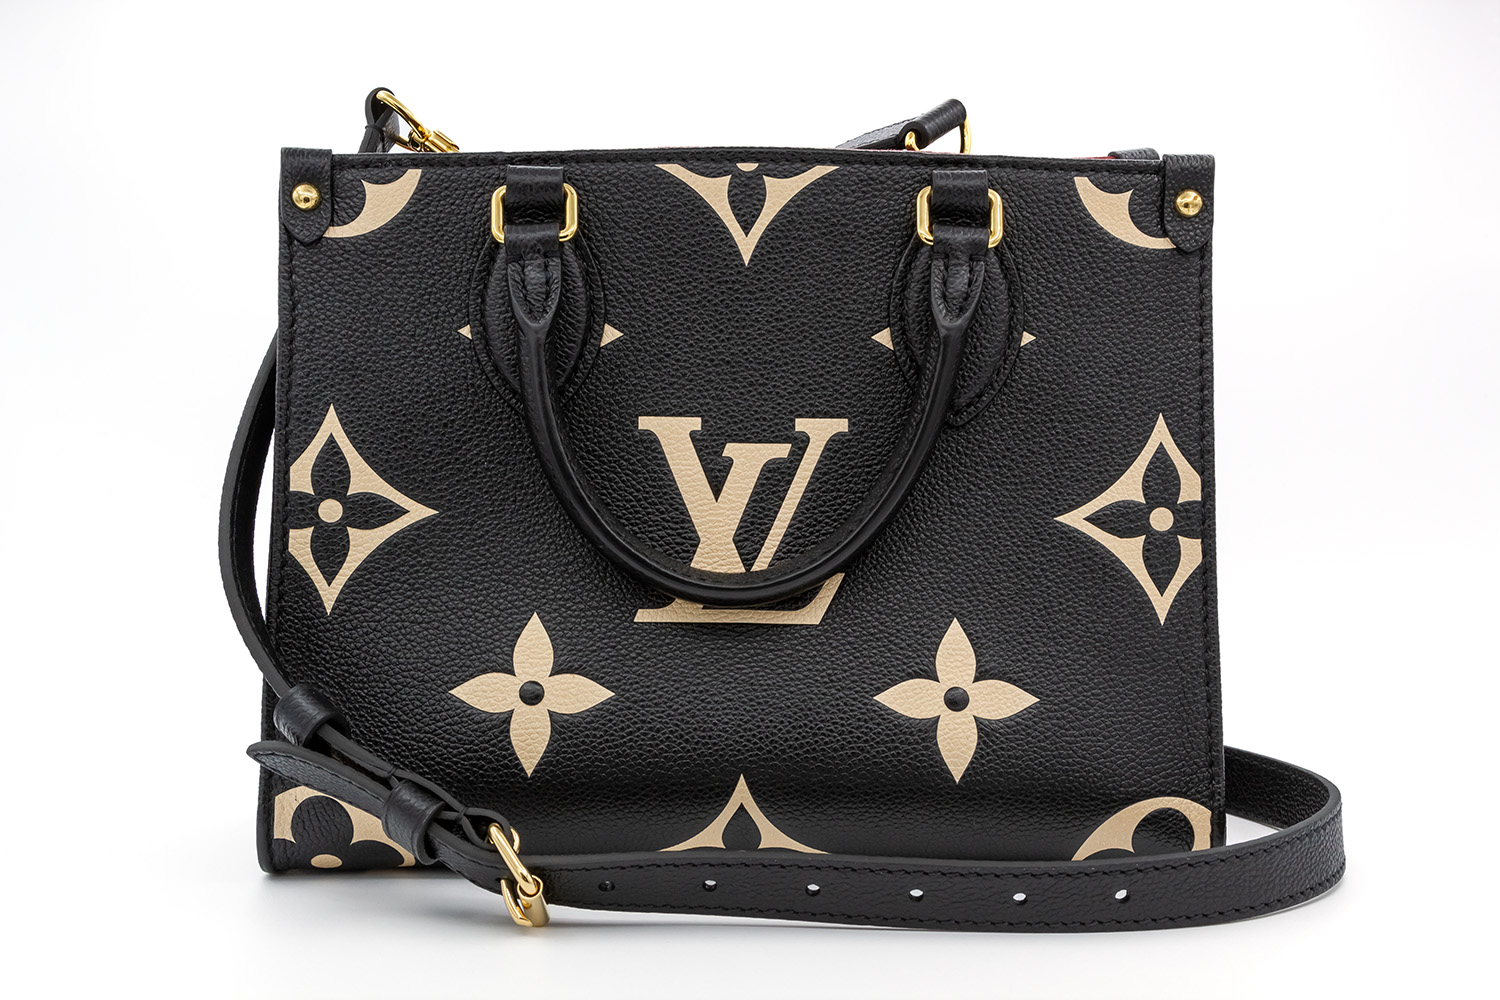 Louis Vuitton Bag LV On The Go Monogram Leather Tote Bag With Dust